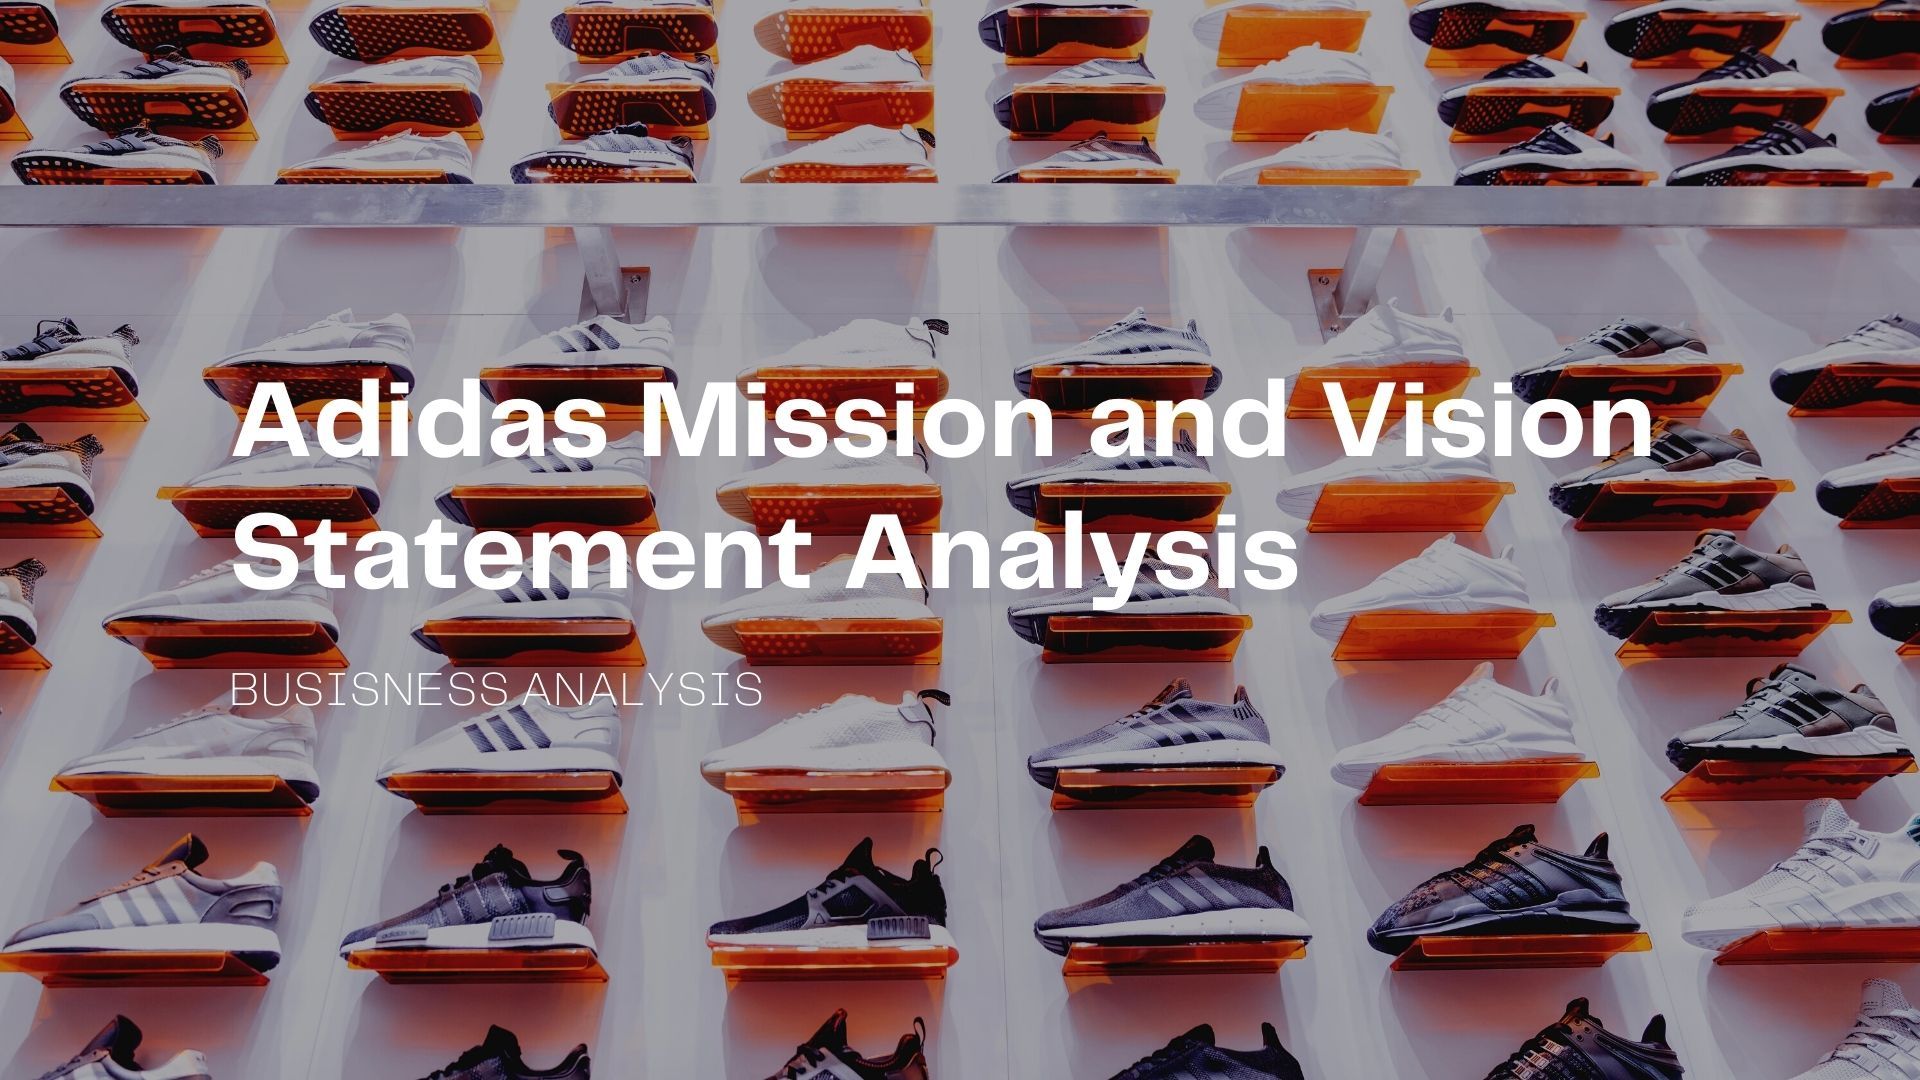 Hombre rico Relacionado Dinkarville Adidas Mission and Vision Statement Analysis | PDF Agile